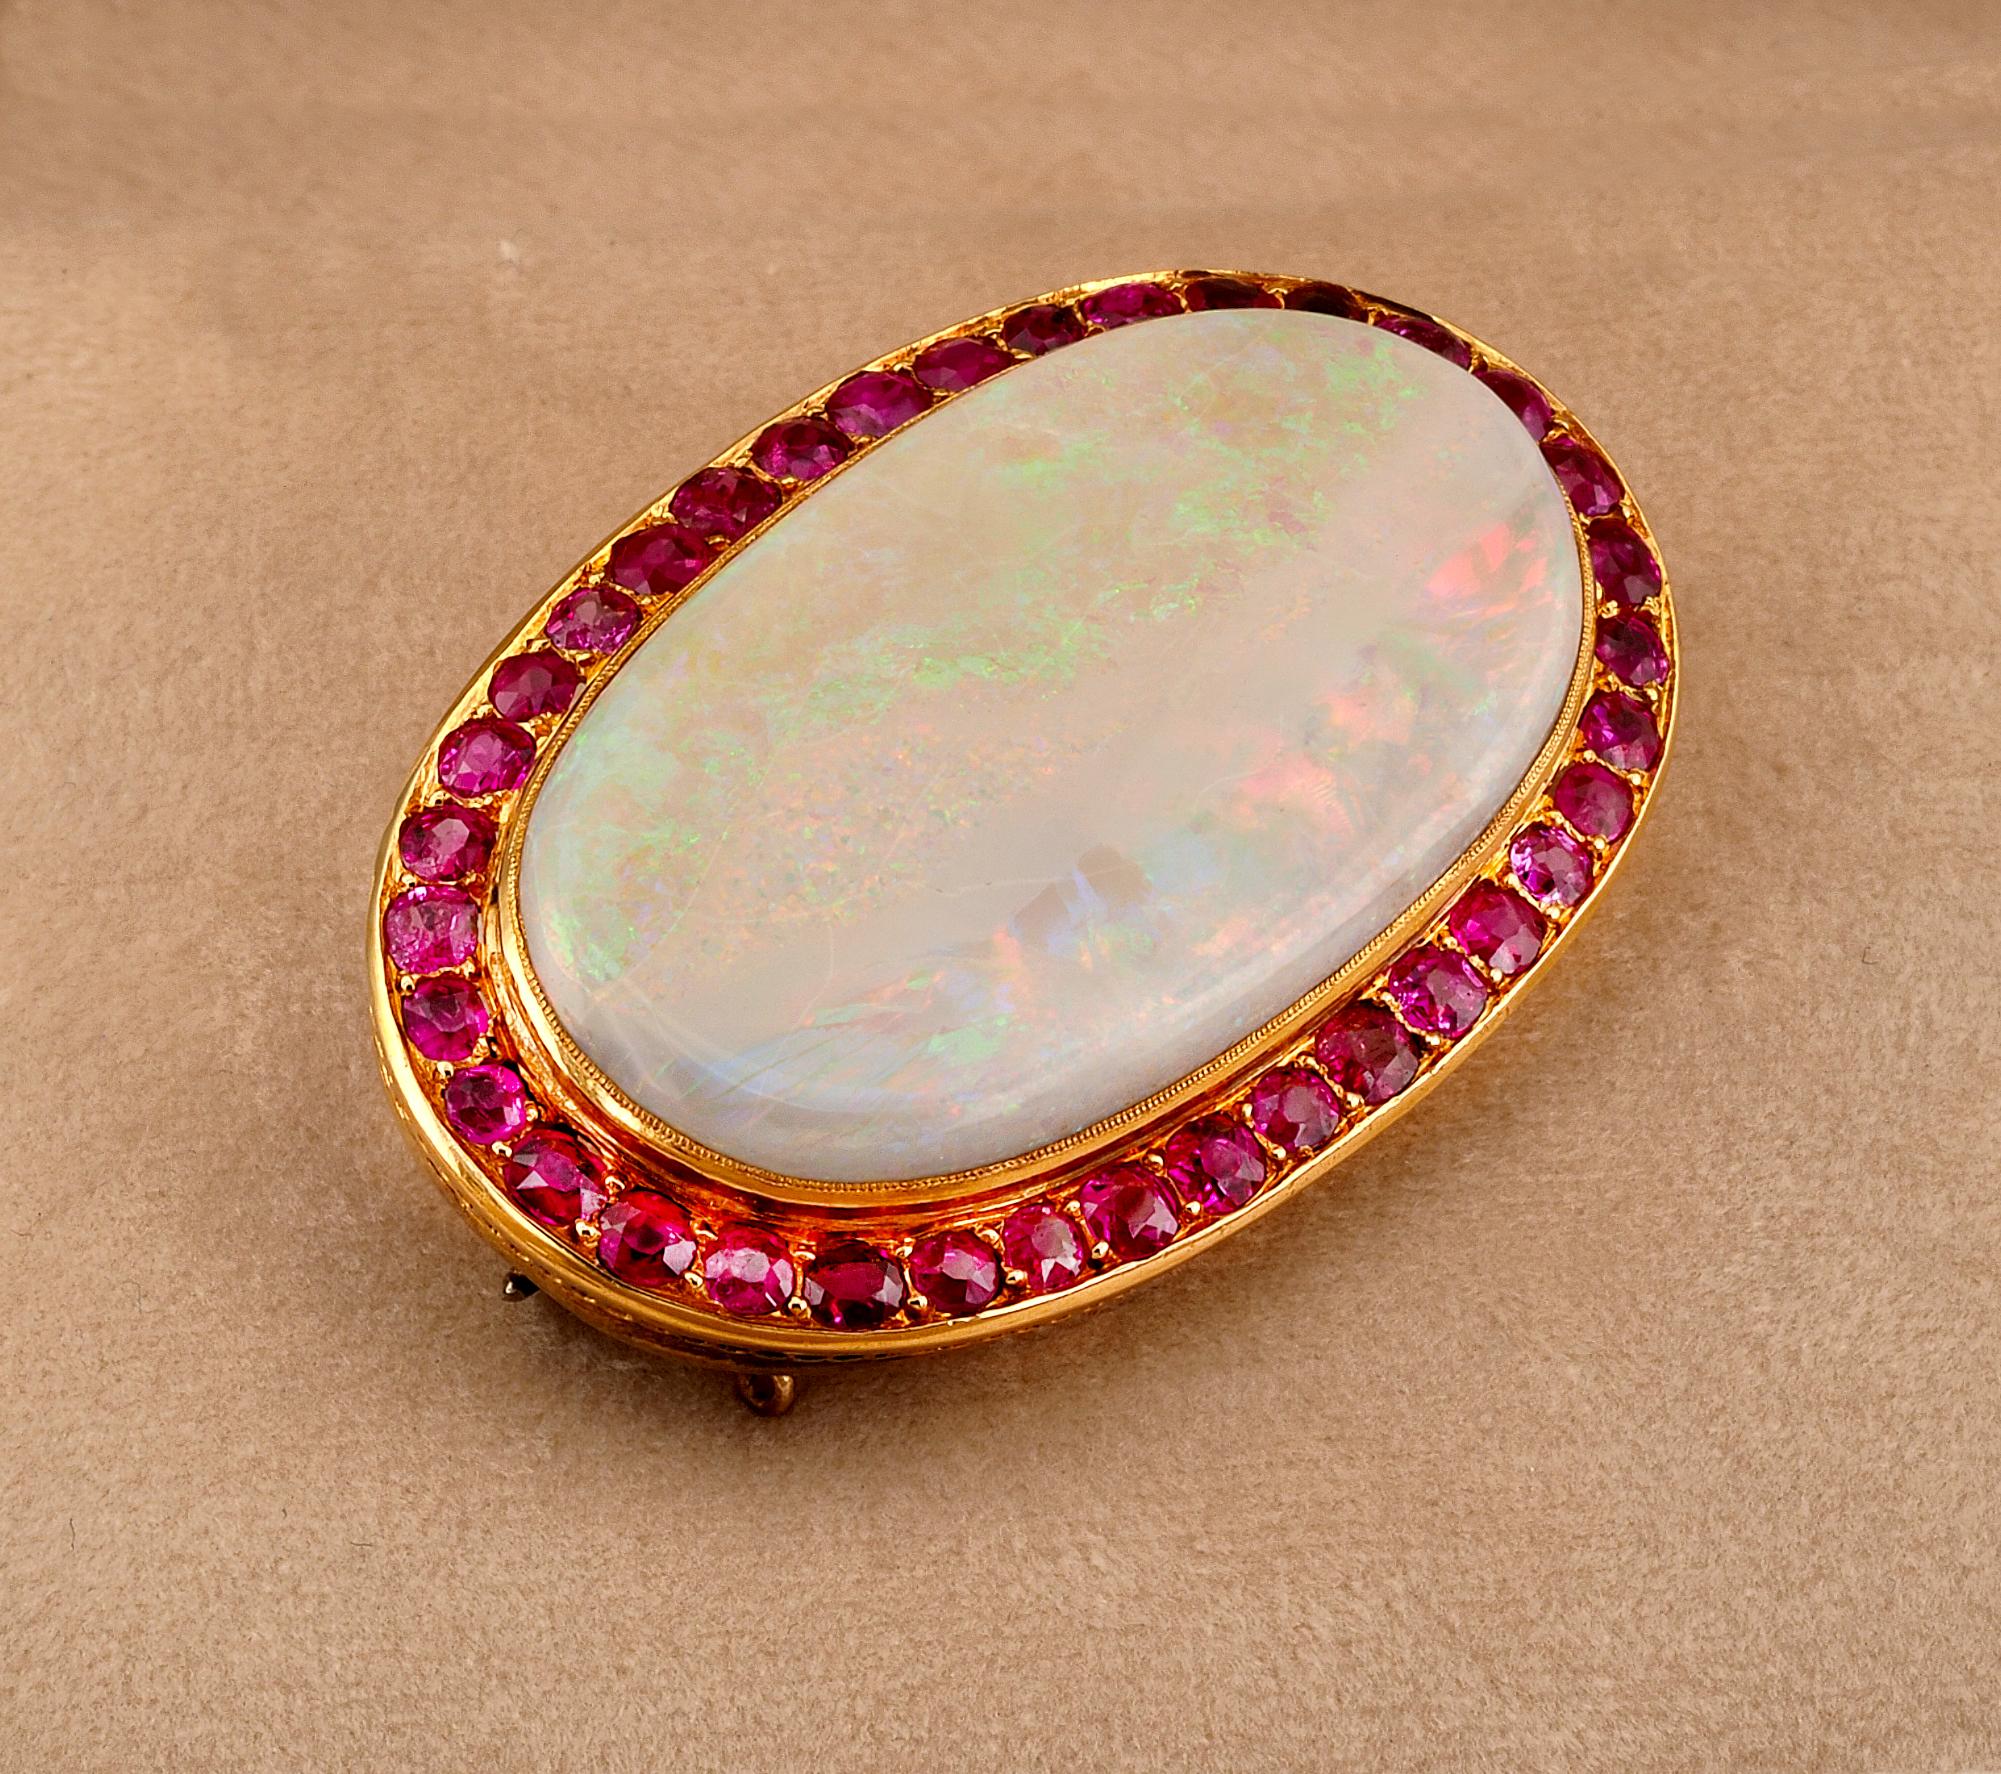 Cabochon French Victorian 39.00 Ct Australian Opal 6.00 Ct Rubies Large Brooch For Sale